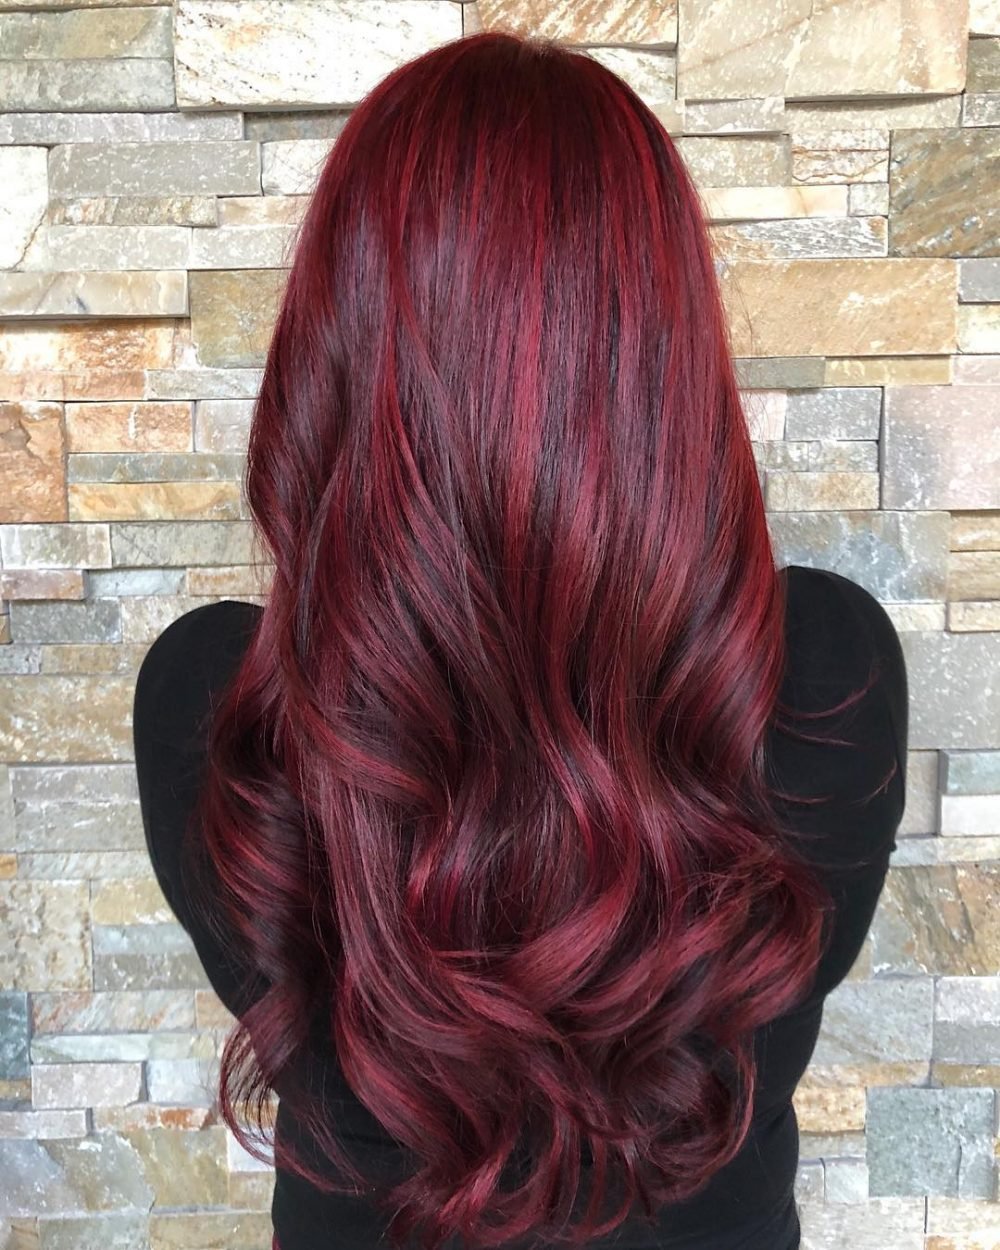 Red Balayage Hair Colors: 19 Hottest Examples for 2019